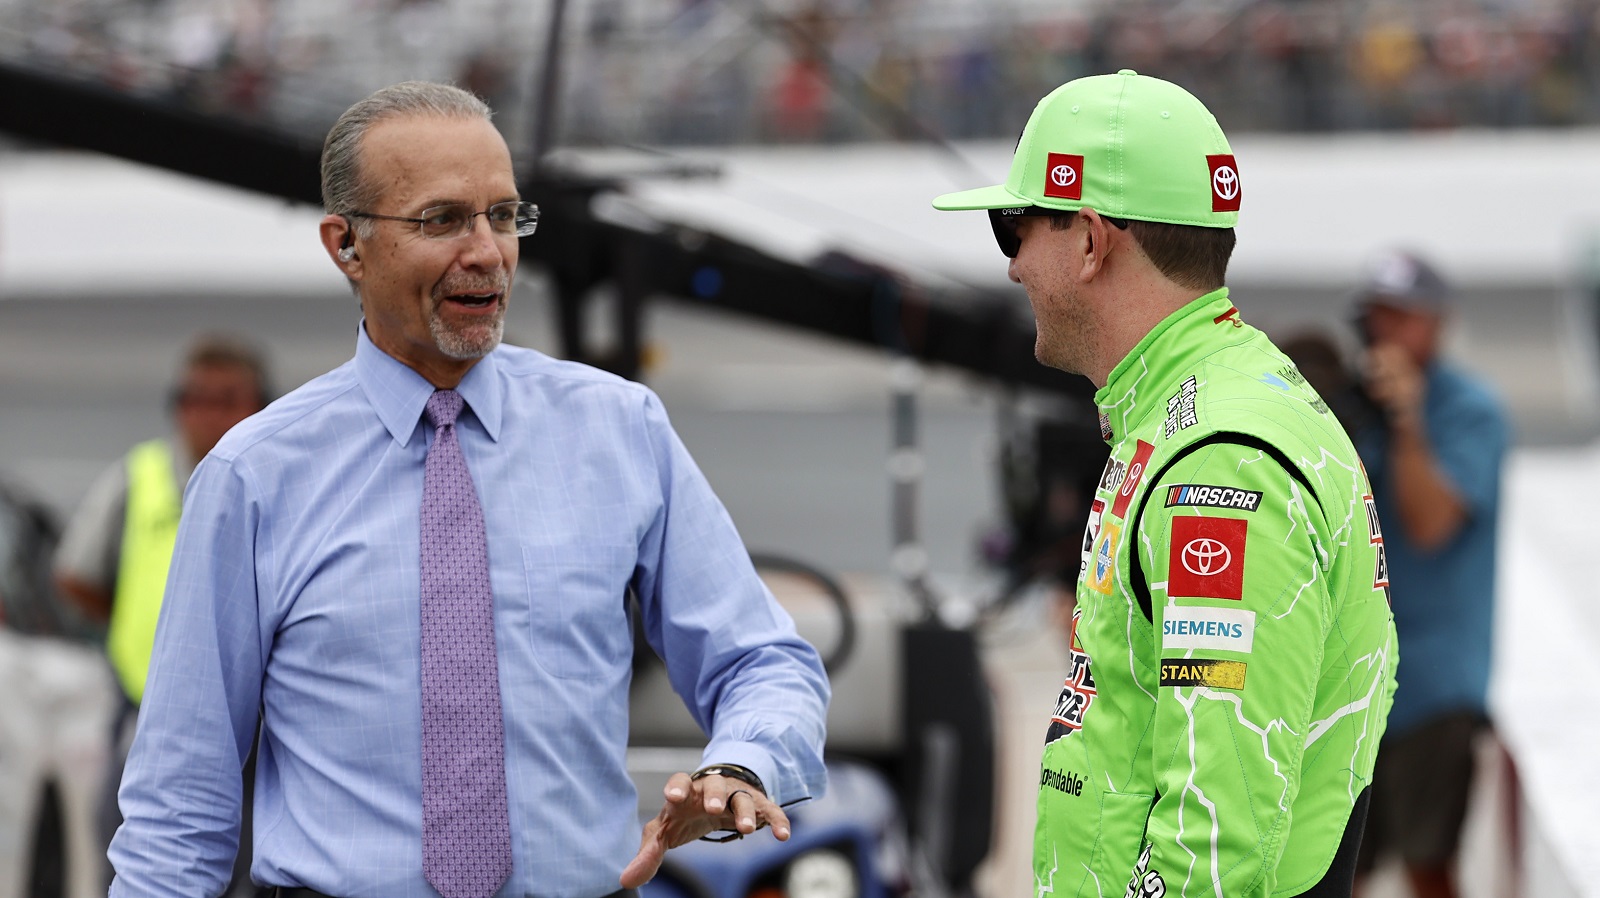 Kyle Petty talks to Kyle Busch before the Foxwoods Resort Casino 301 on July 18, 2021, at New Hampshire Motor Speedway in Loudon, New Hampshire.